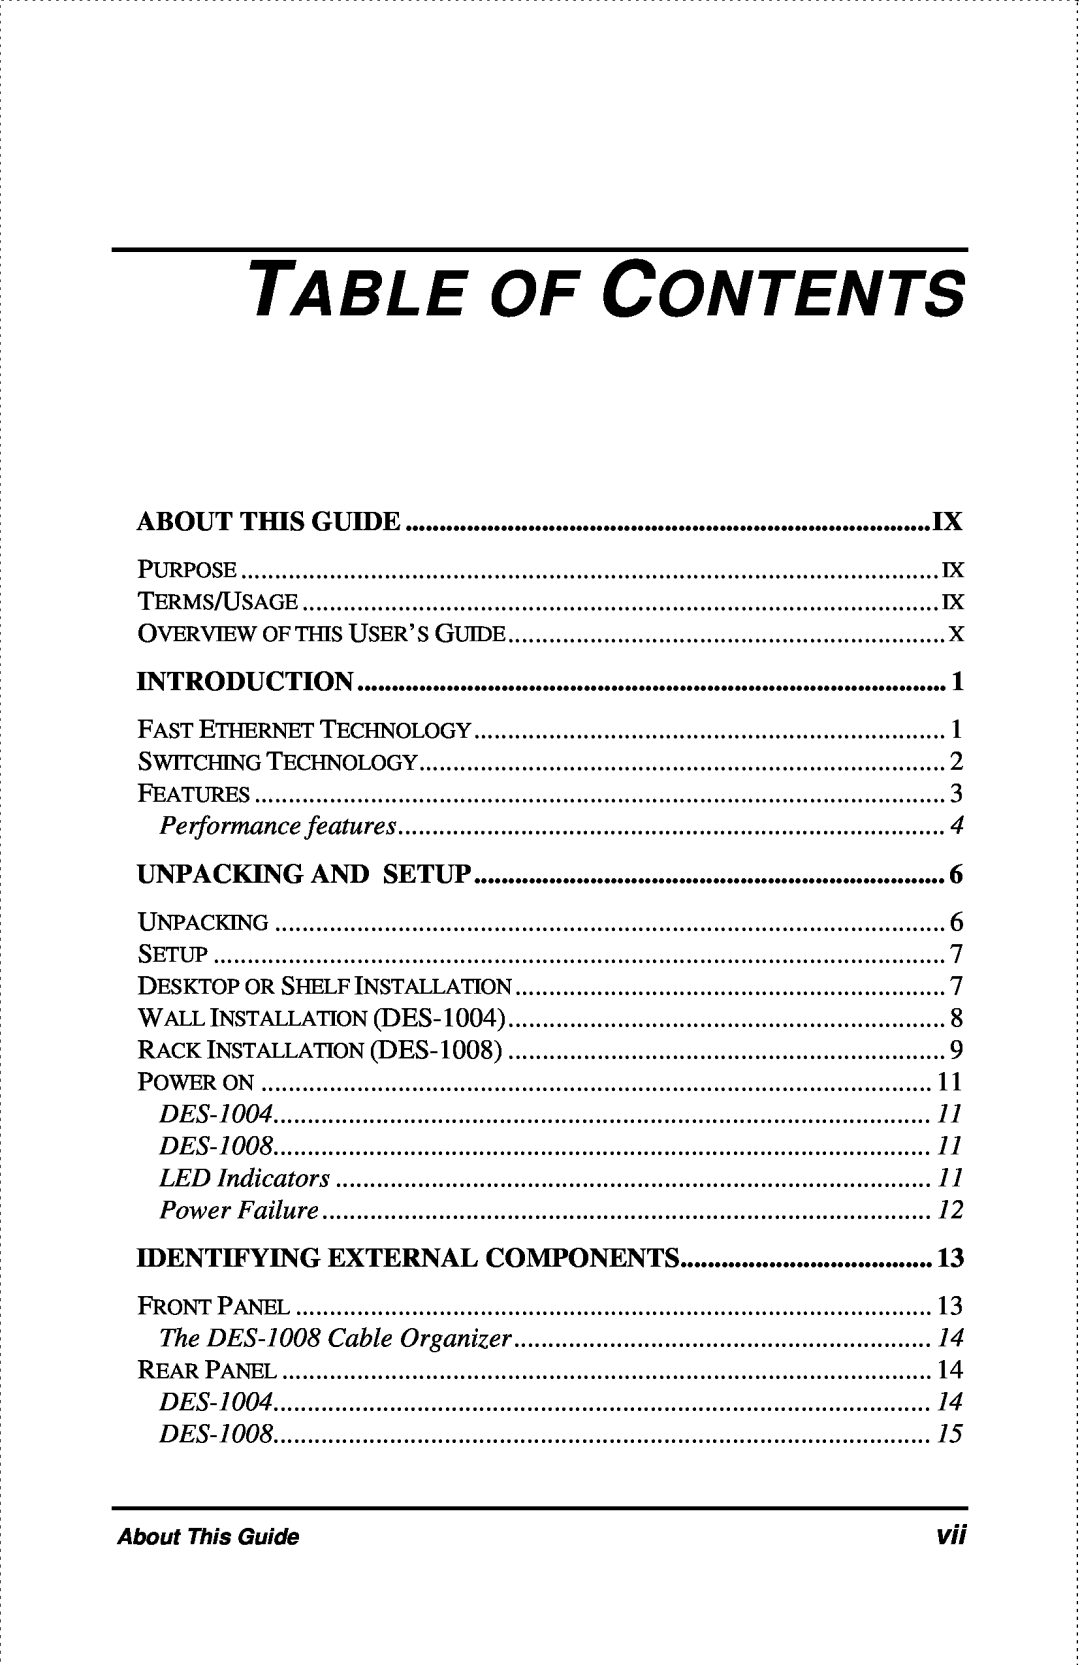 D-Link DES-1004 Table Of Contents, About This Guide, Introduction, Performance features, Unpacking And Setup, DES-1008 